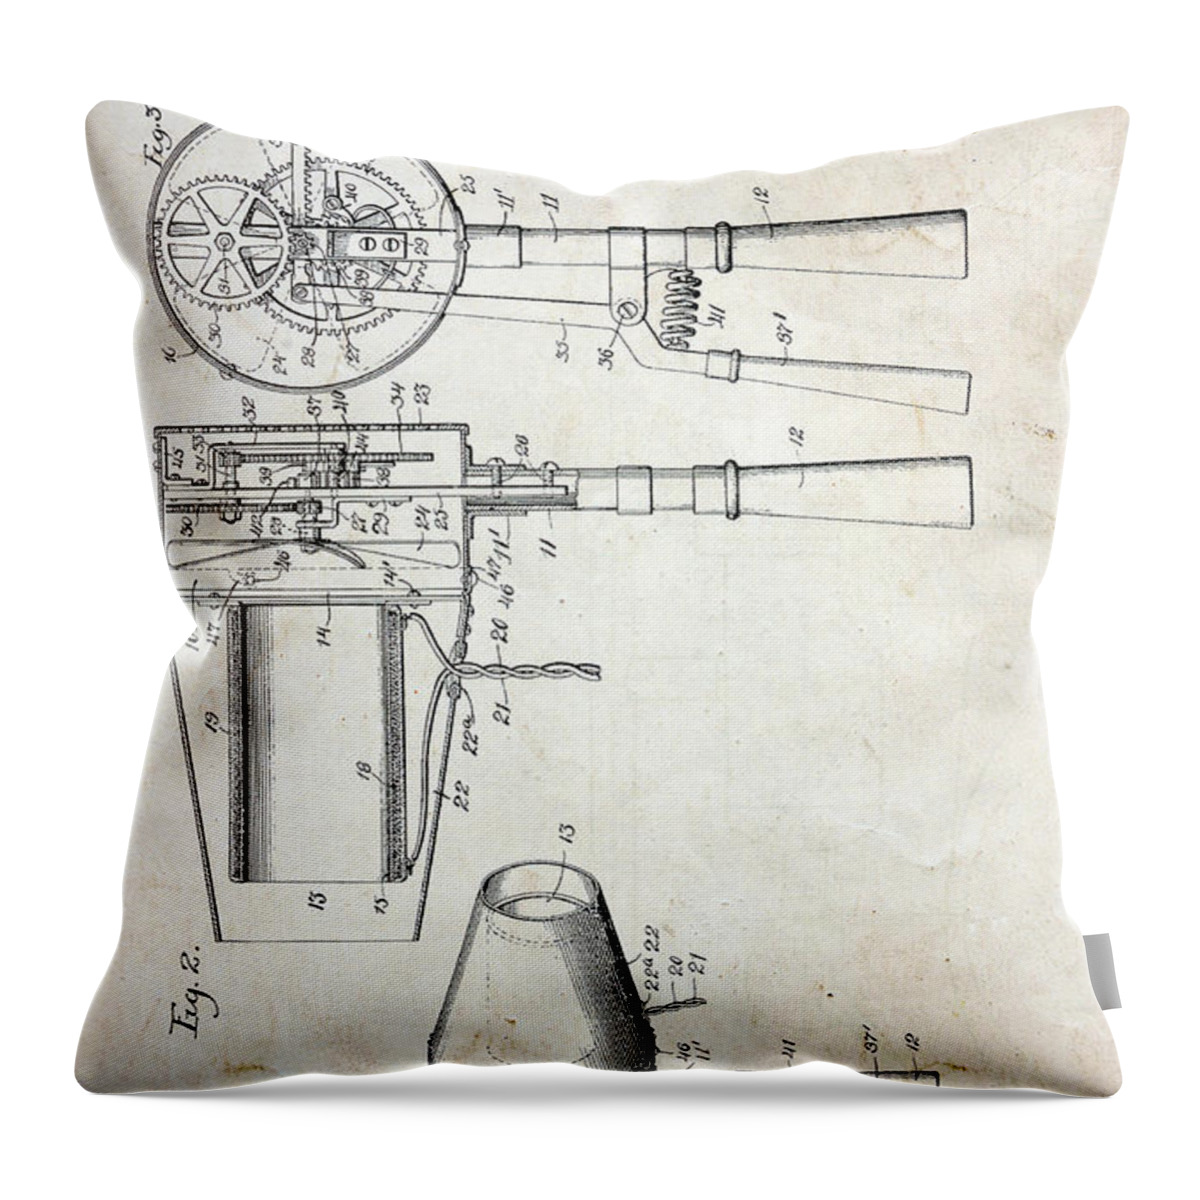 Paul Ward Throw Pillow featuring the photograph Vintage Hair Dryer Patent by Paul Ward